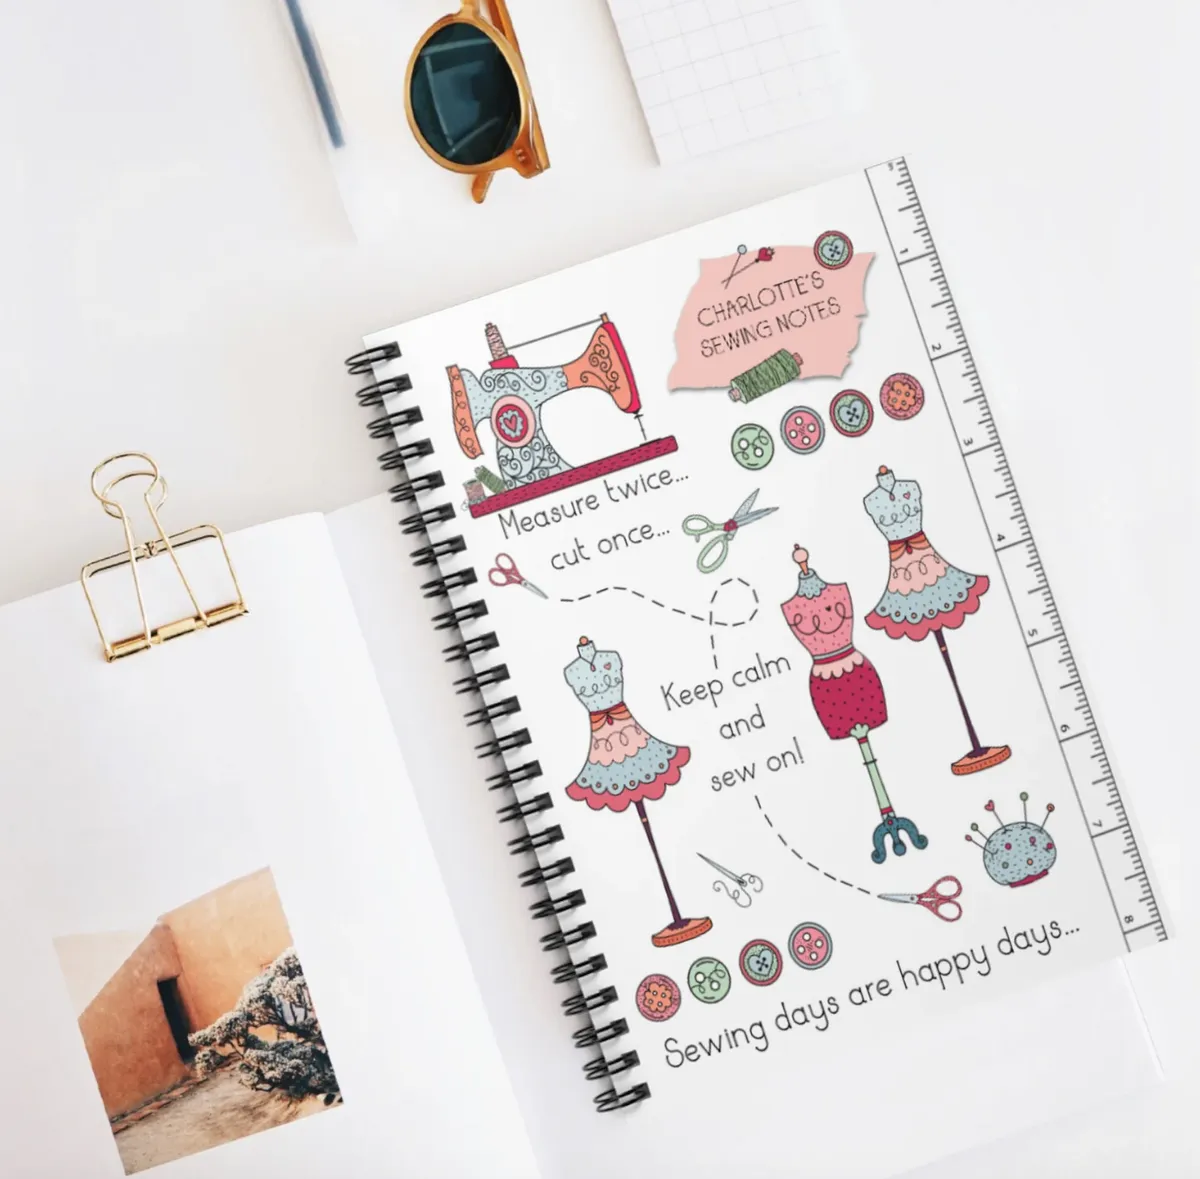 Project planner notebook